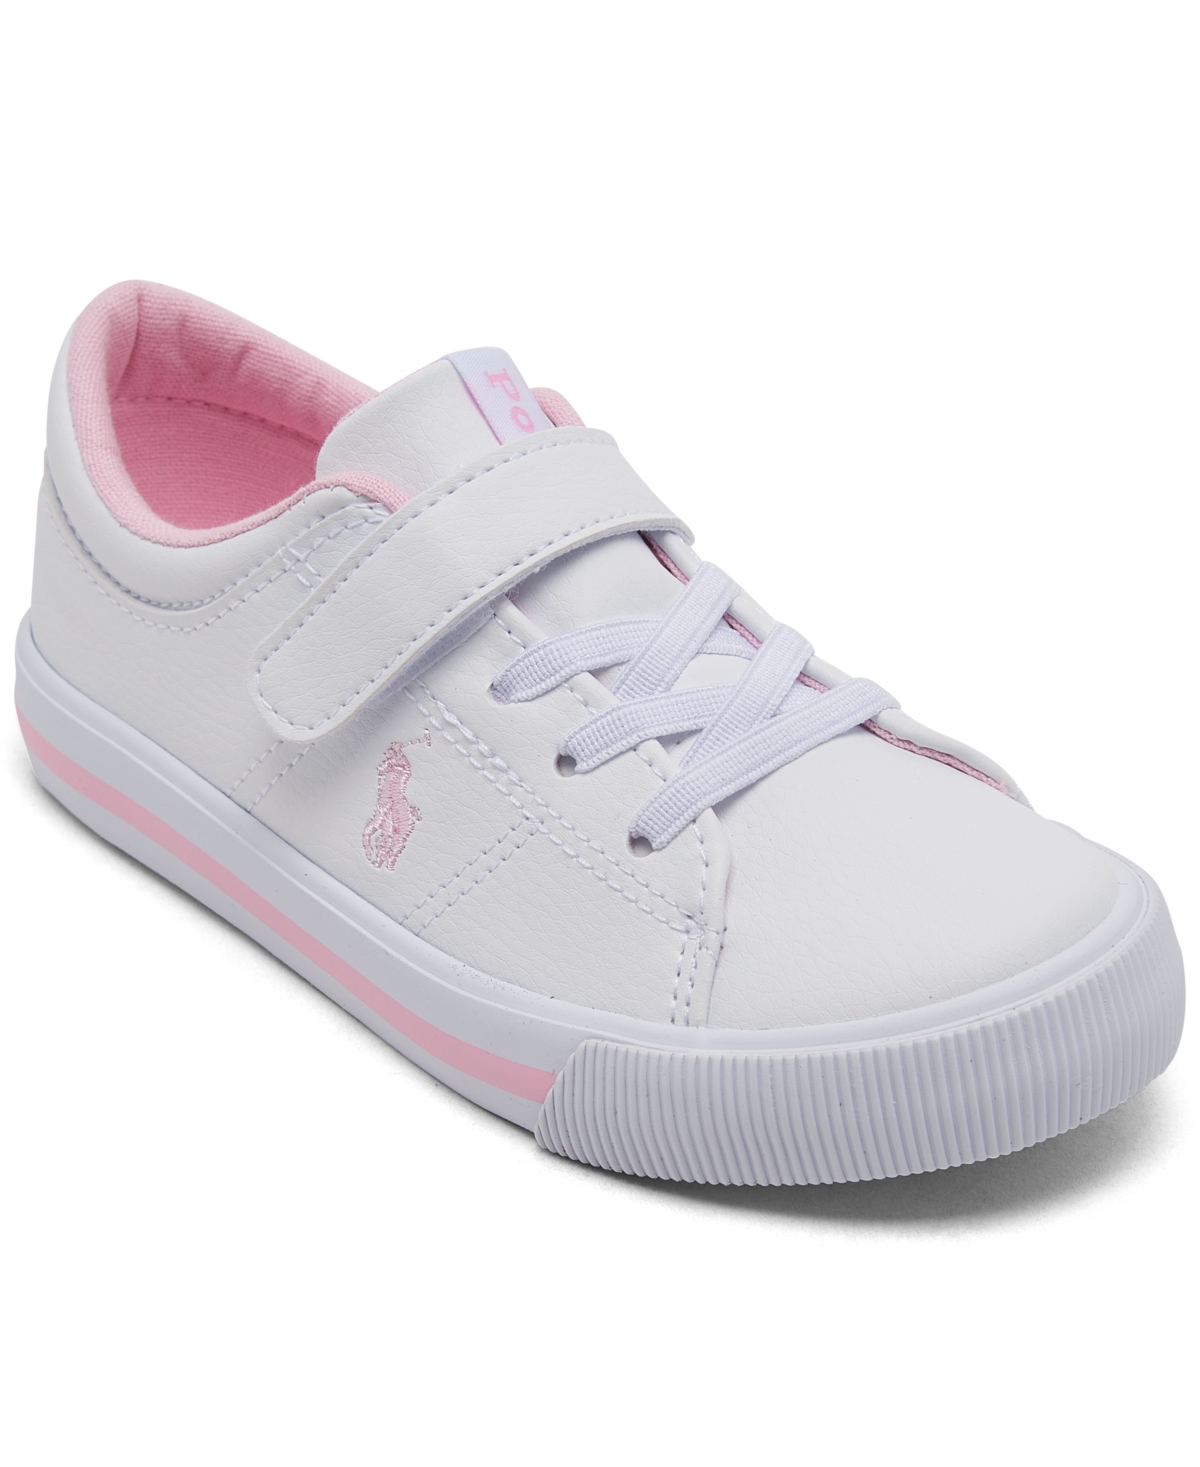 Polo Ralph Lauren Babies' Toddler Girls Elmwood Stay-put Closure Casual Sneakers From Finish Line In White,light Pink